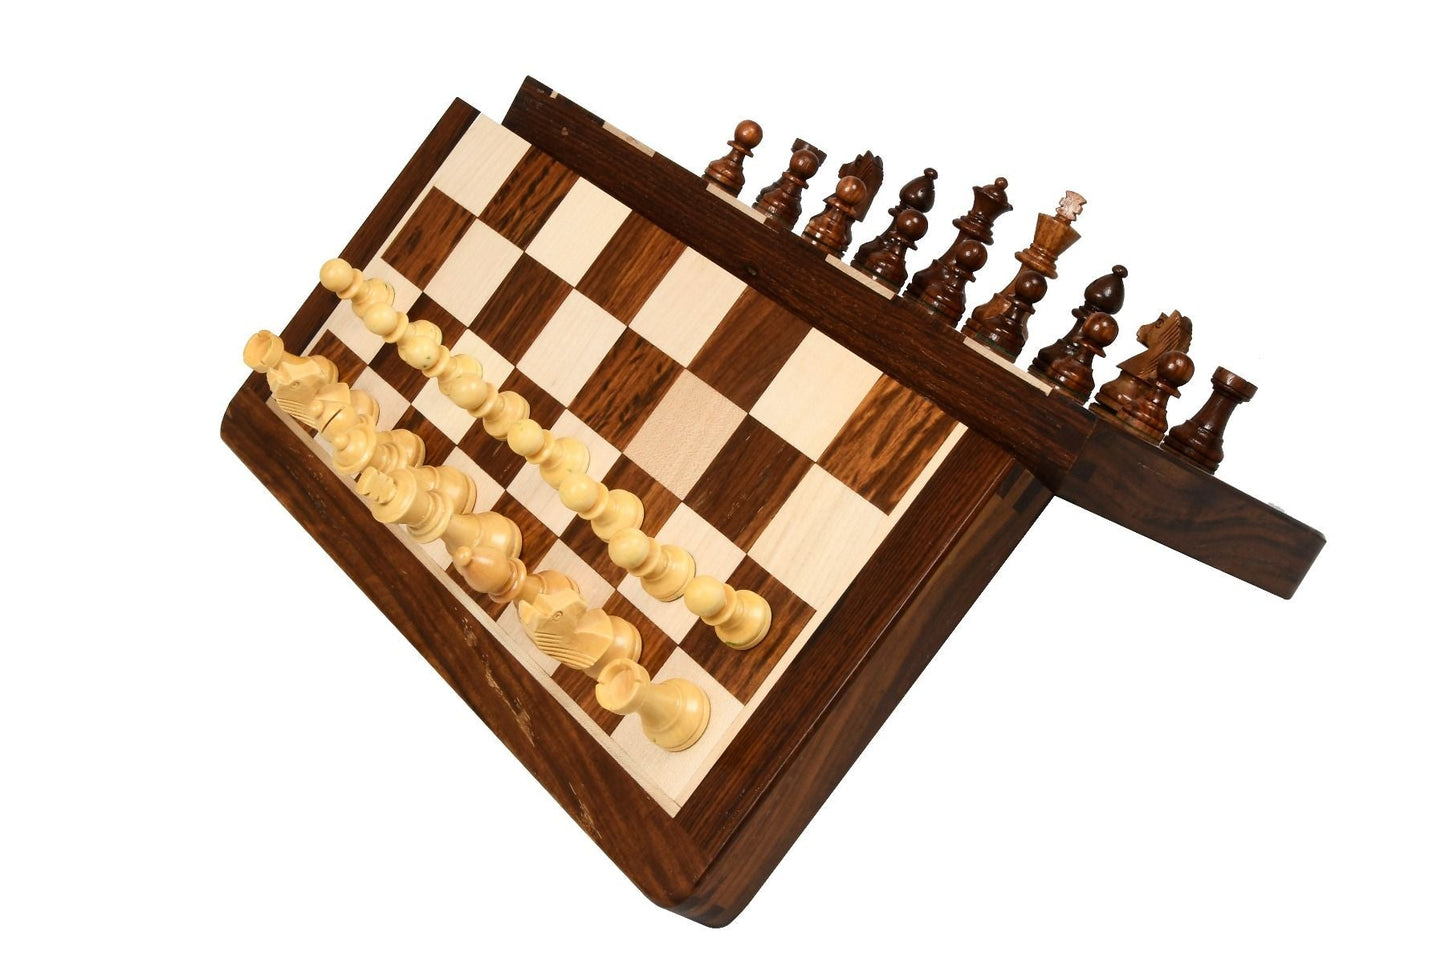 14 inches magnetic foldable travel chess set with store space for chess pieces